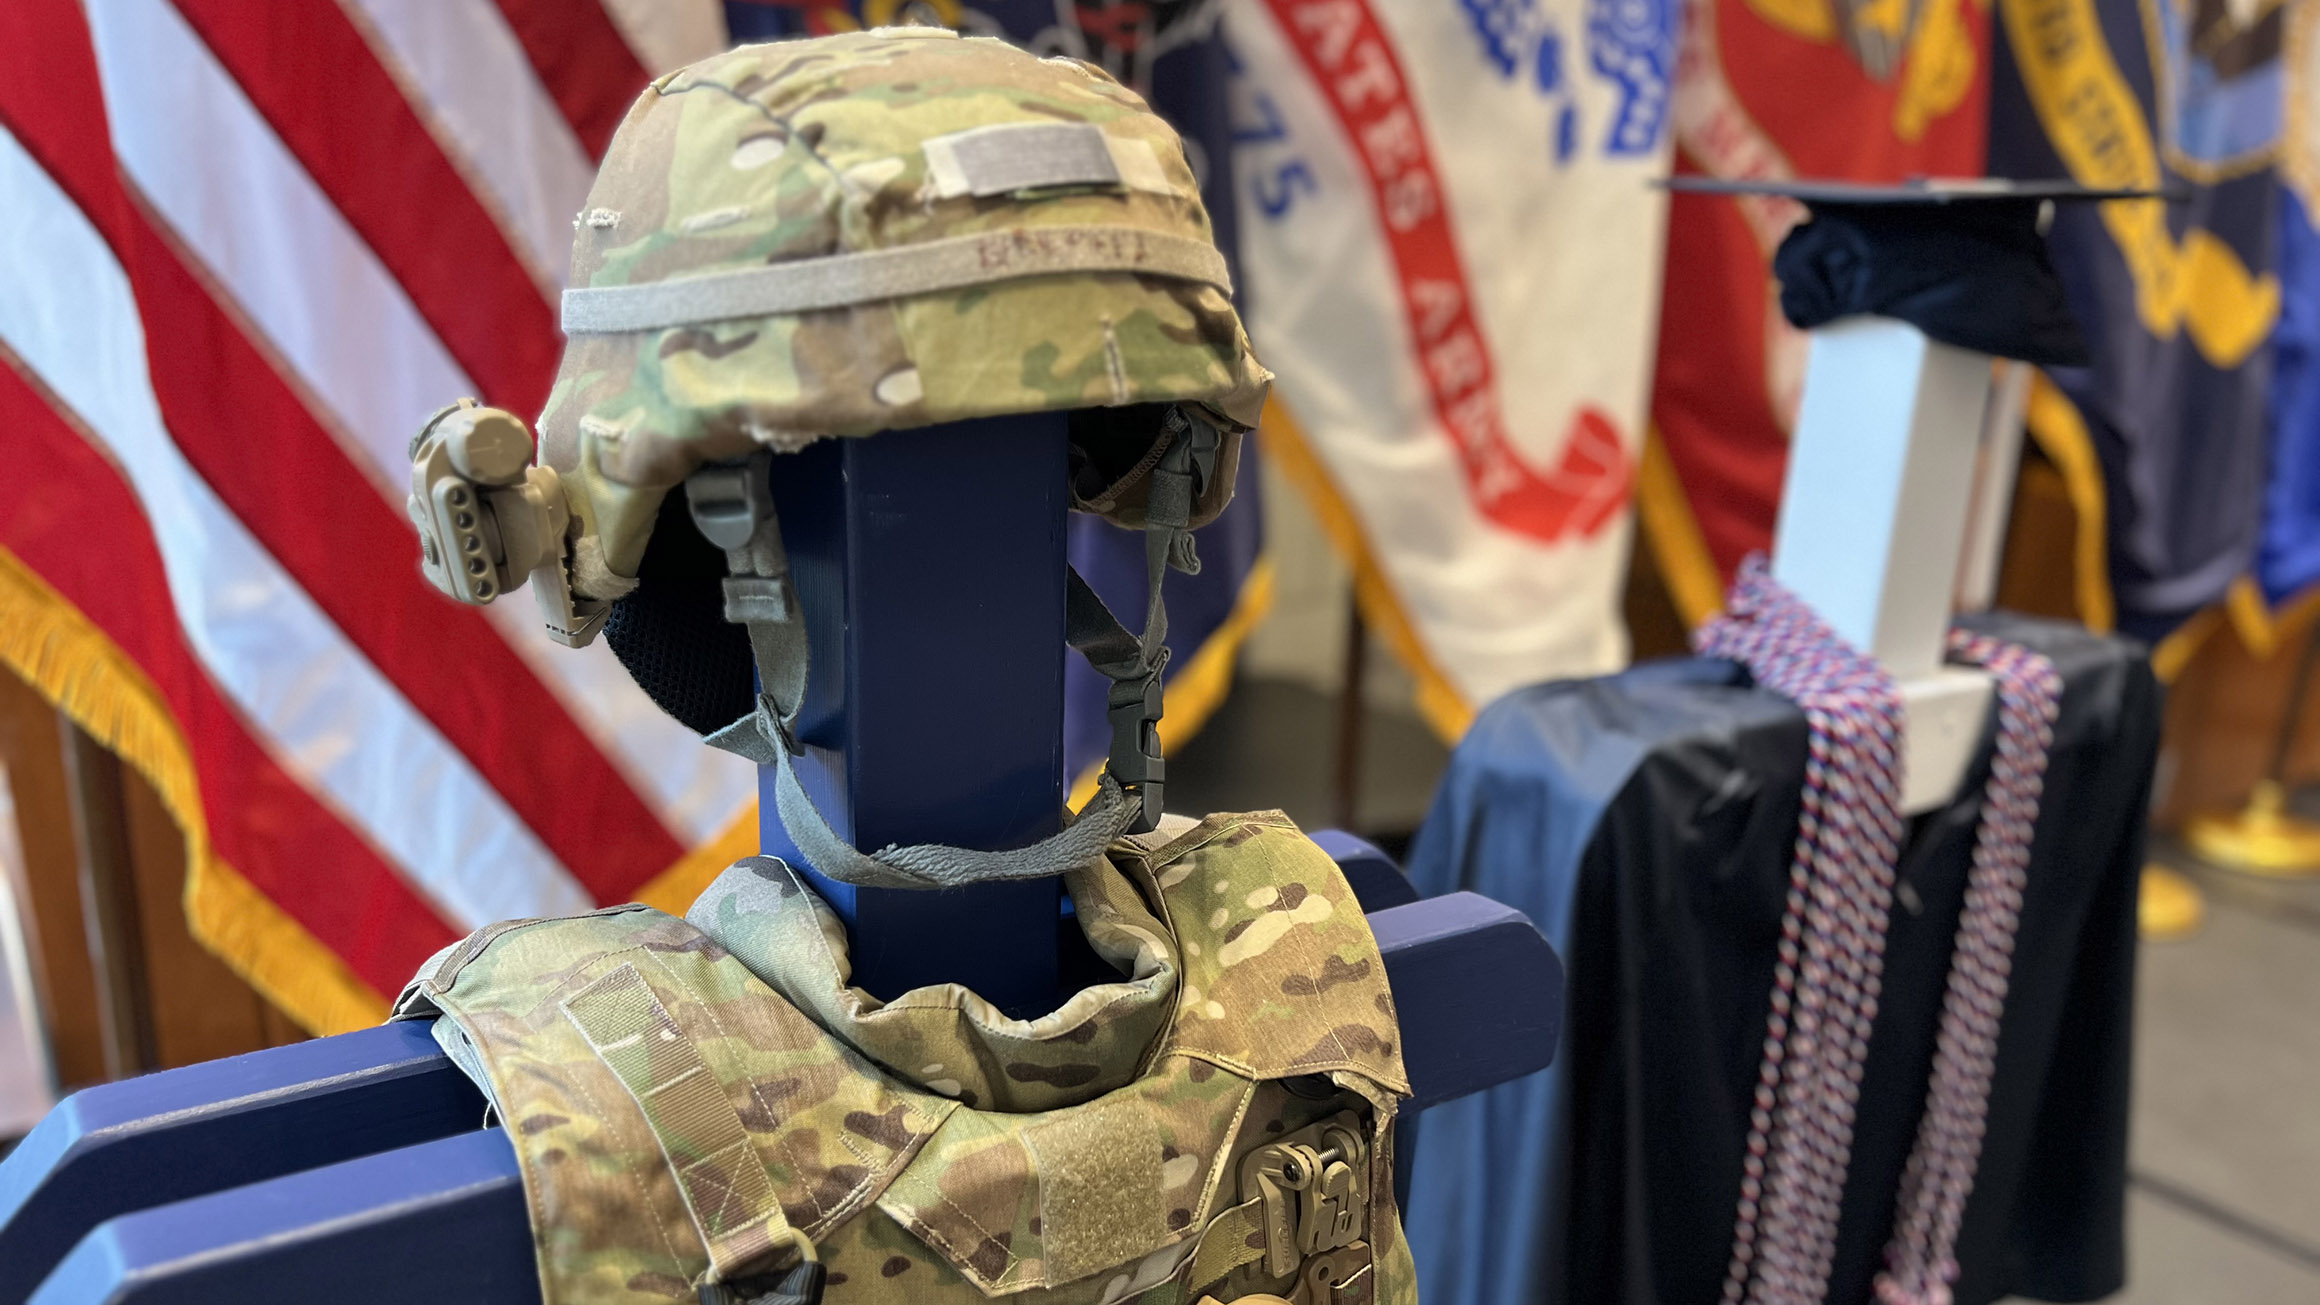 Military gear and honor cords draped around a graduation gown are shown on a dummy